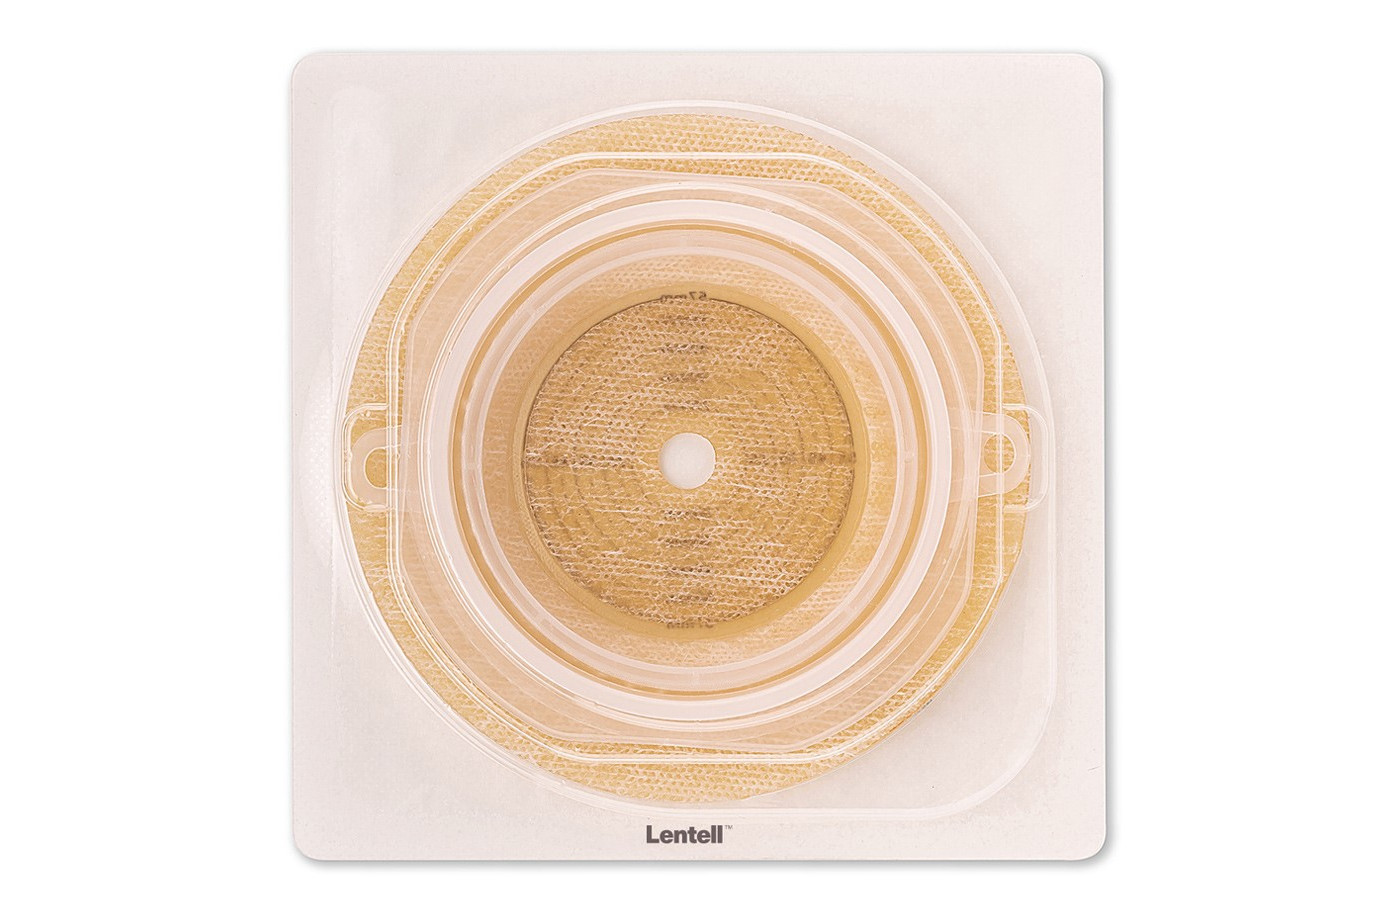 LENTELL CONVEX II TWO-PIECE SYSTEM